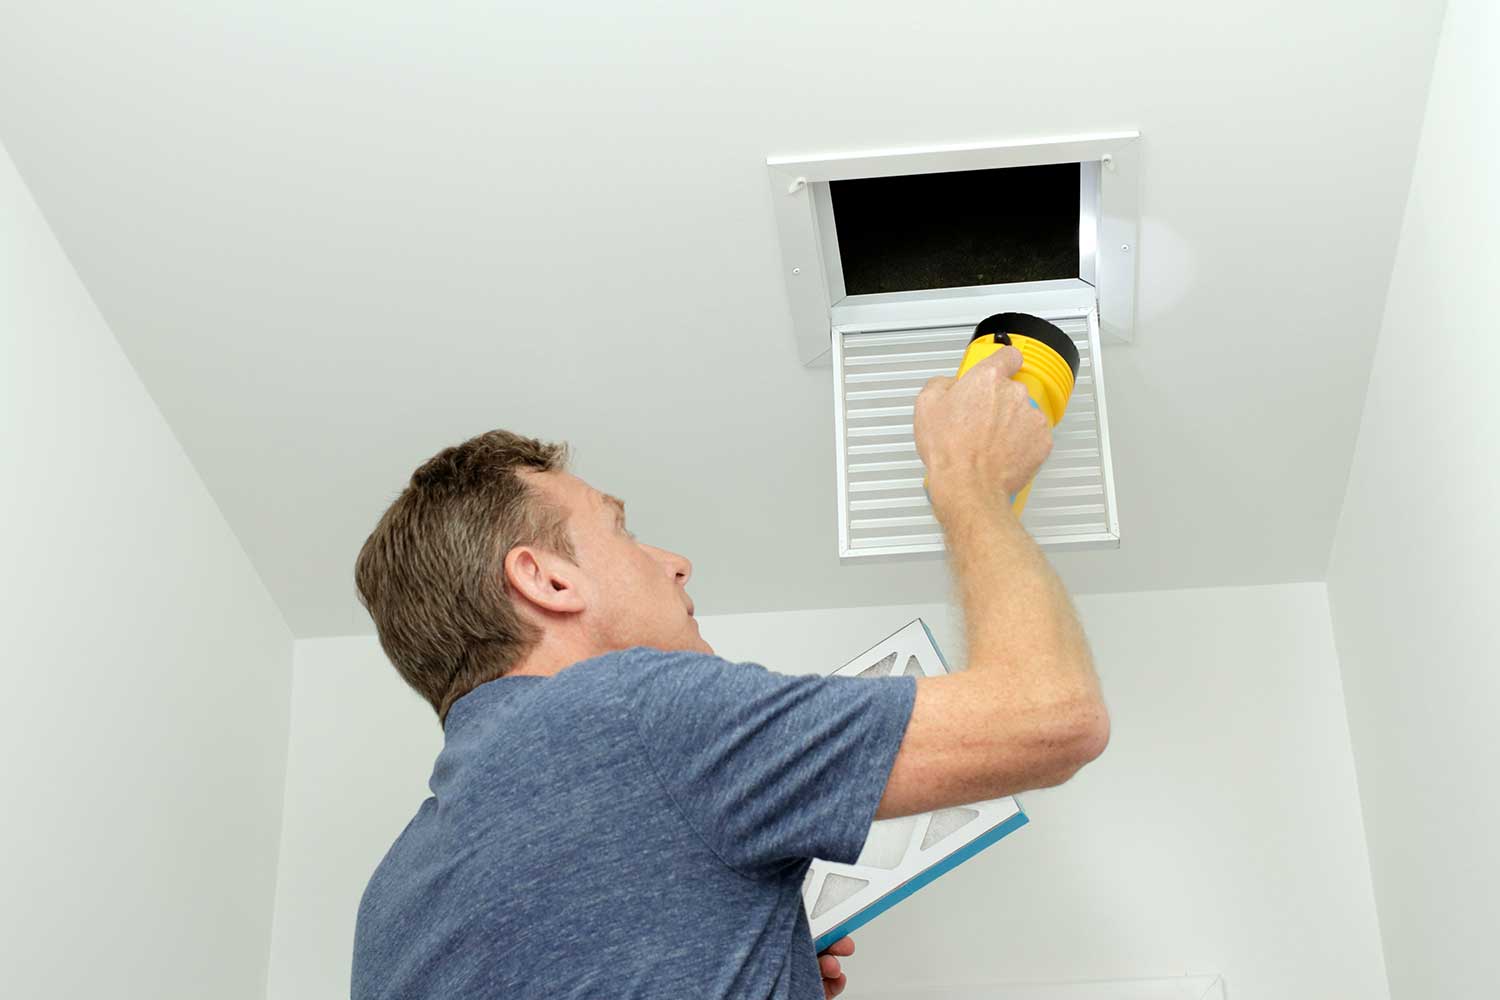 Buying a Ductless Mini Split A/C Unit for my Place This Week